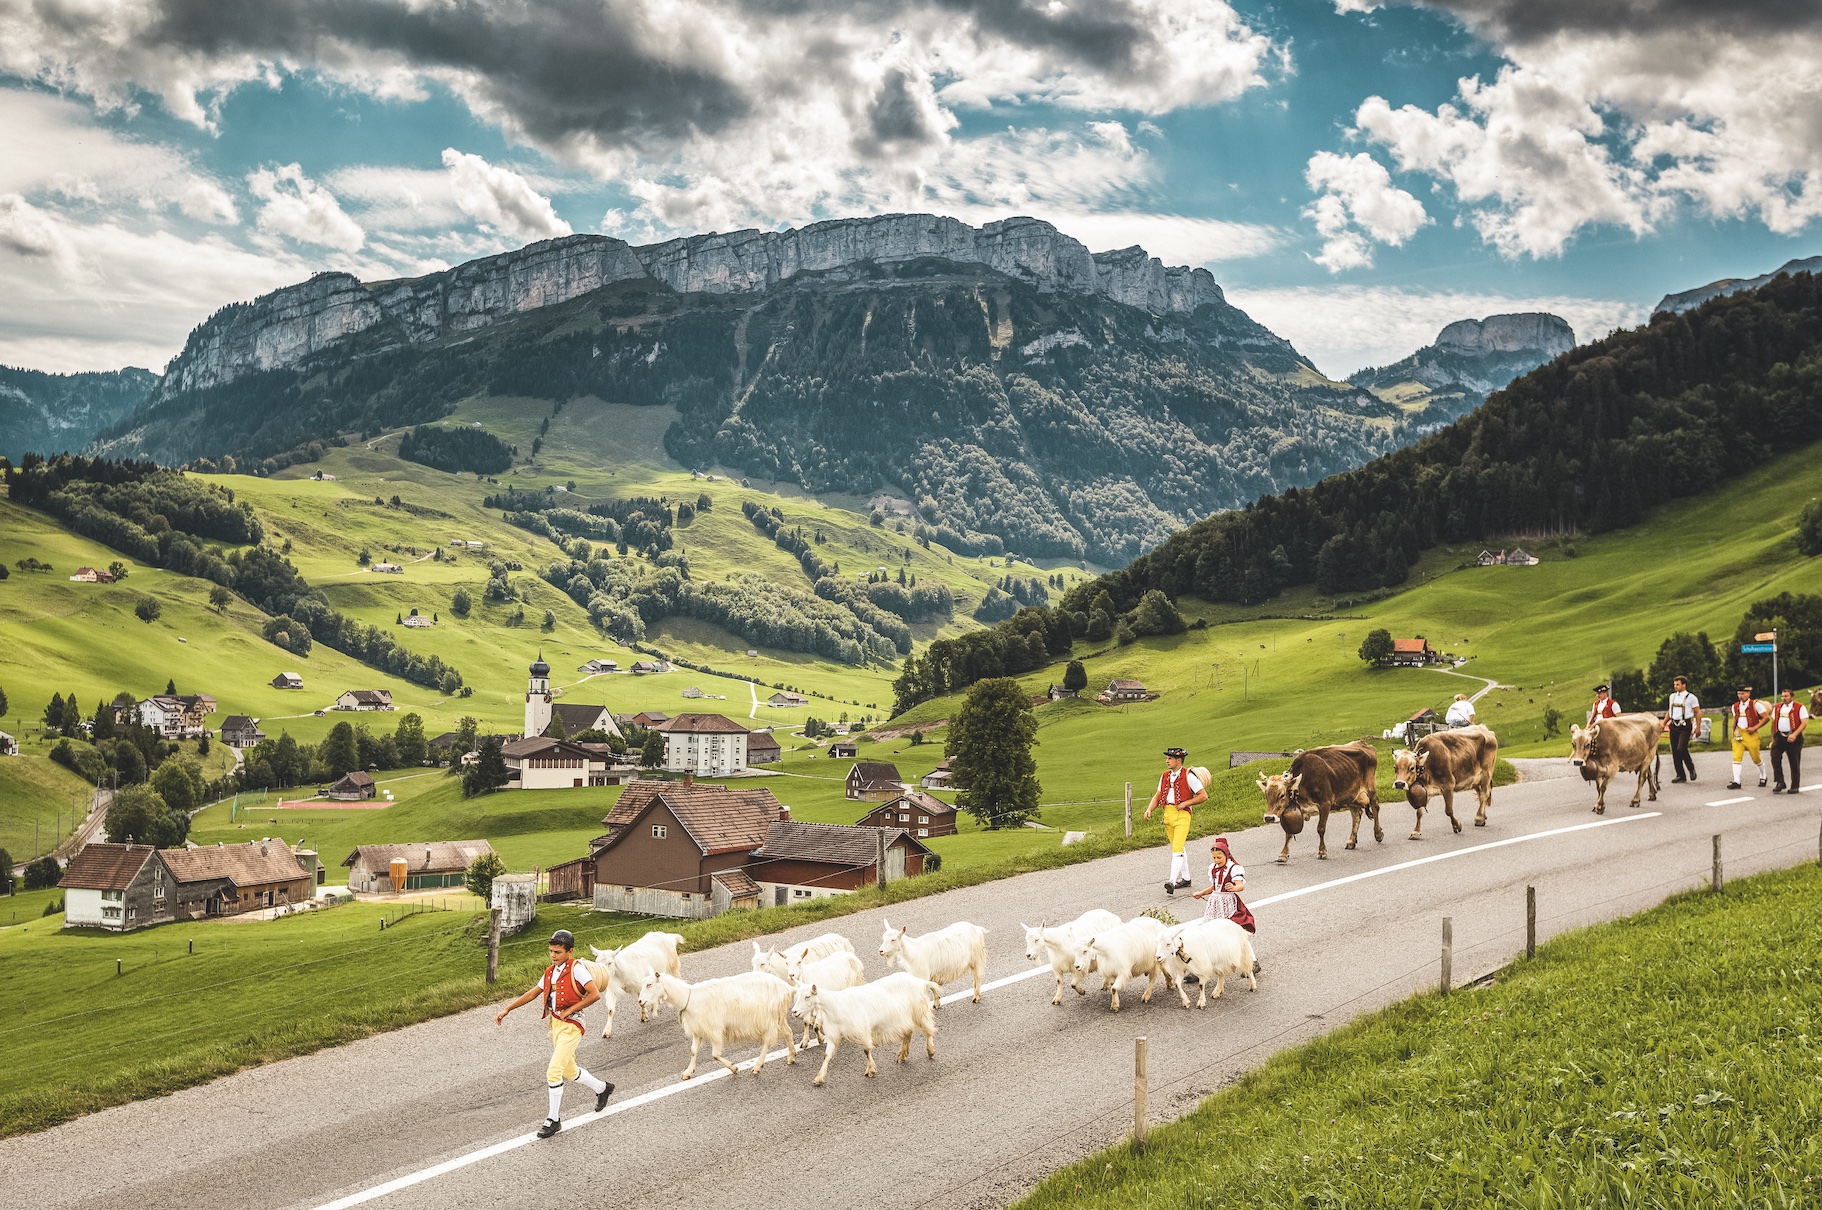 Cows, goats and their costumed herders parade down the mountainside in an Alpine descent festival near Schwende in the canton of Appenzell Innerrhoden. Switzerland Tourism/Jan Geerk